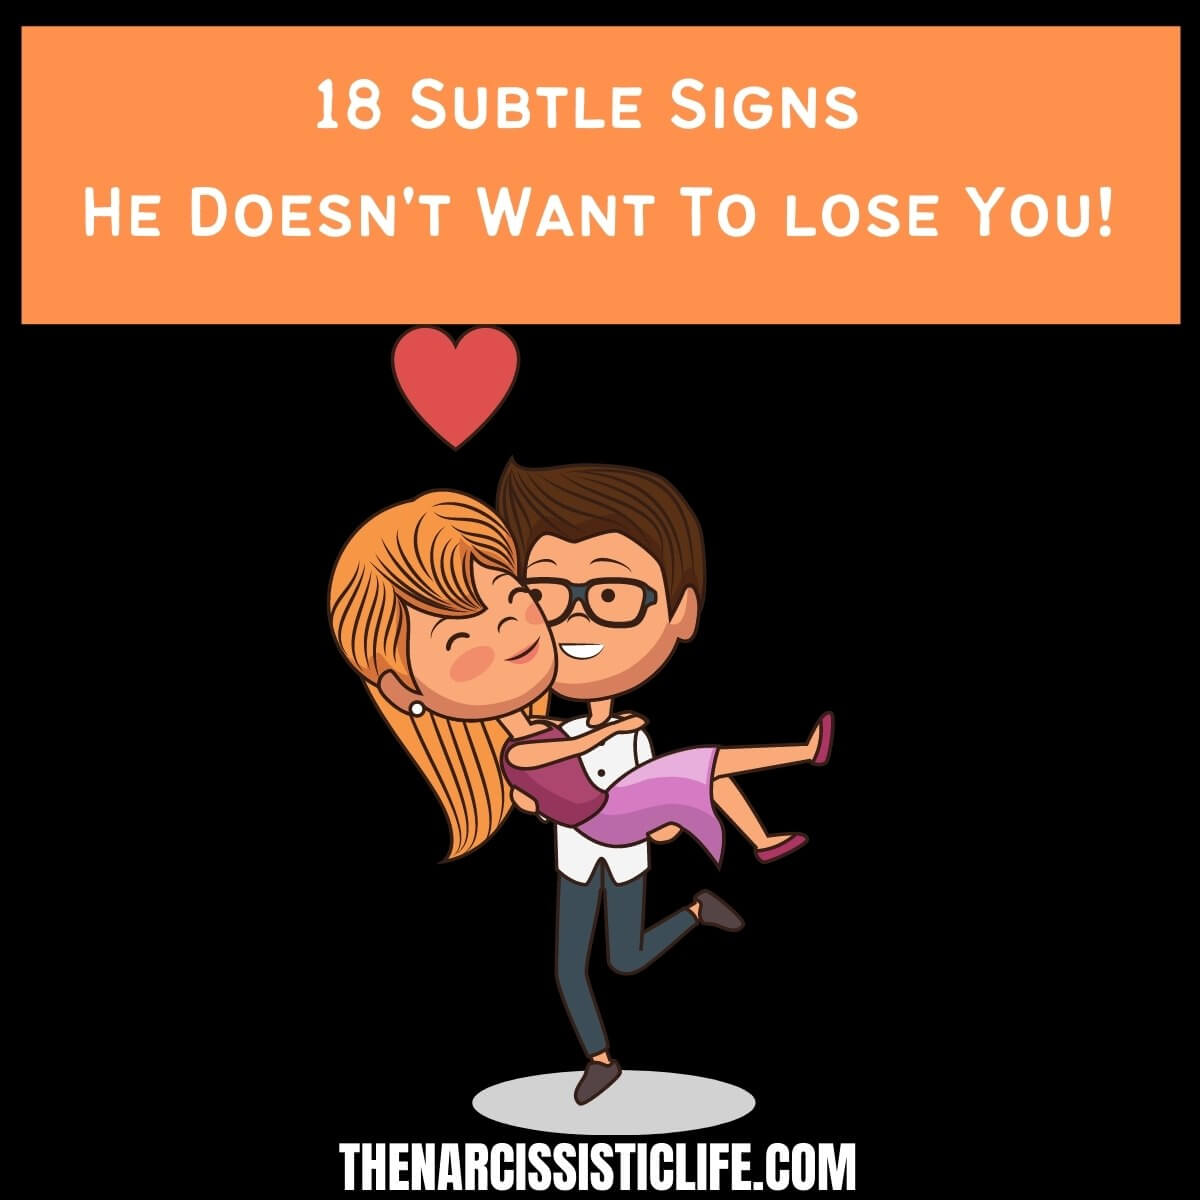 18 Subtle Signs He Doesn't Want To lose You!